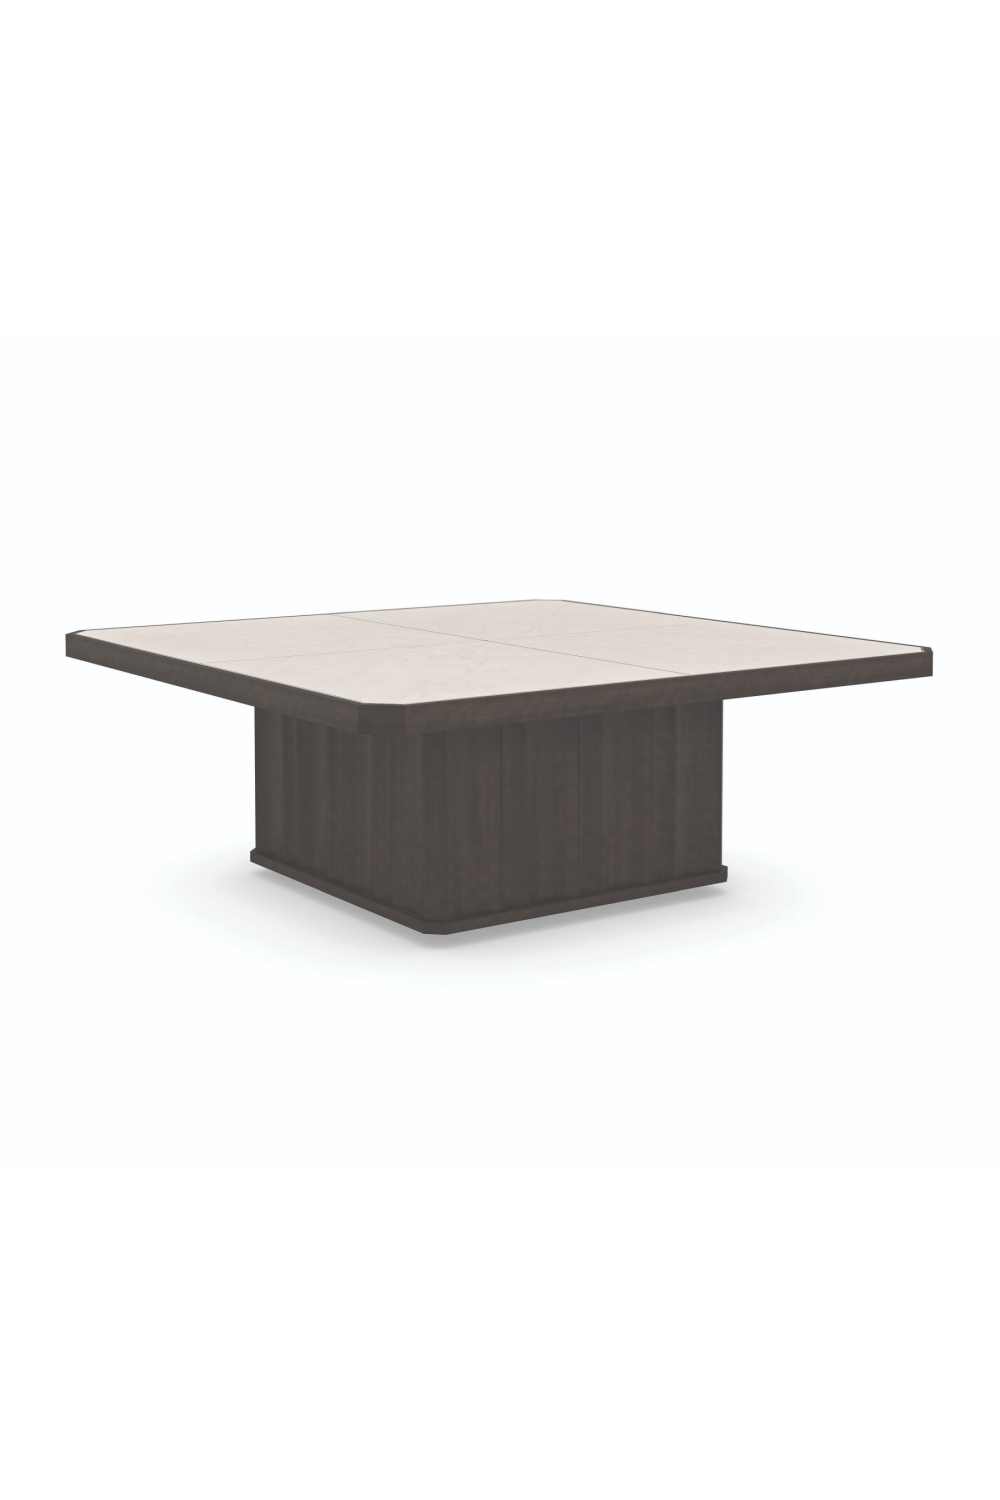 Cream Travertine Cocktail Table | Caracole Solid As A Rock | Oroa.com